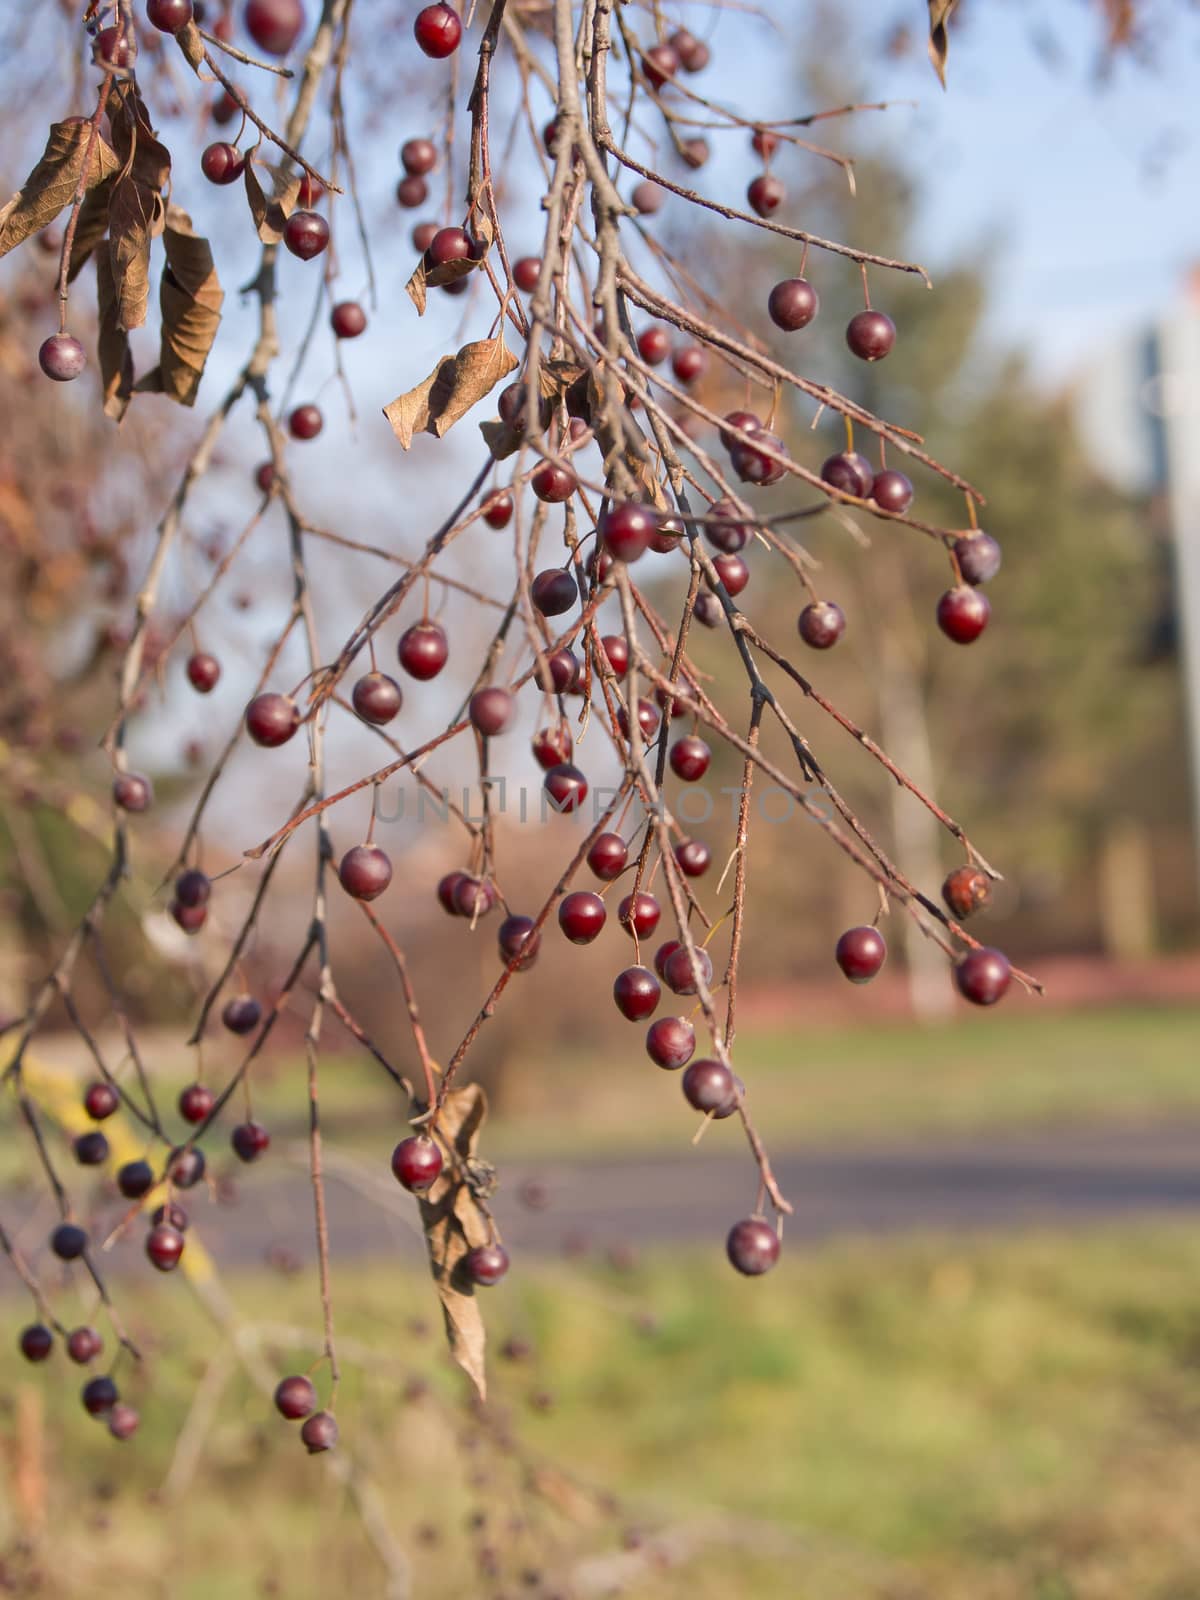 The mild winter berries trees in the park.